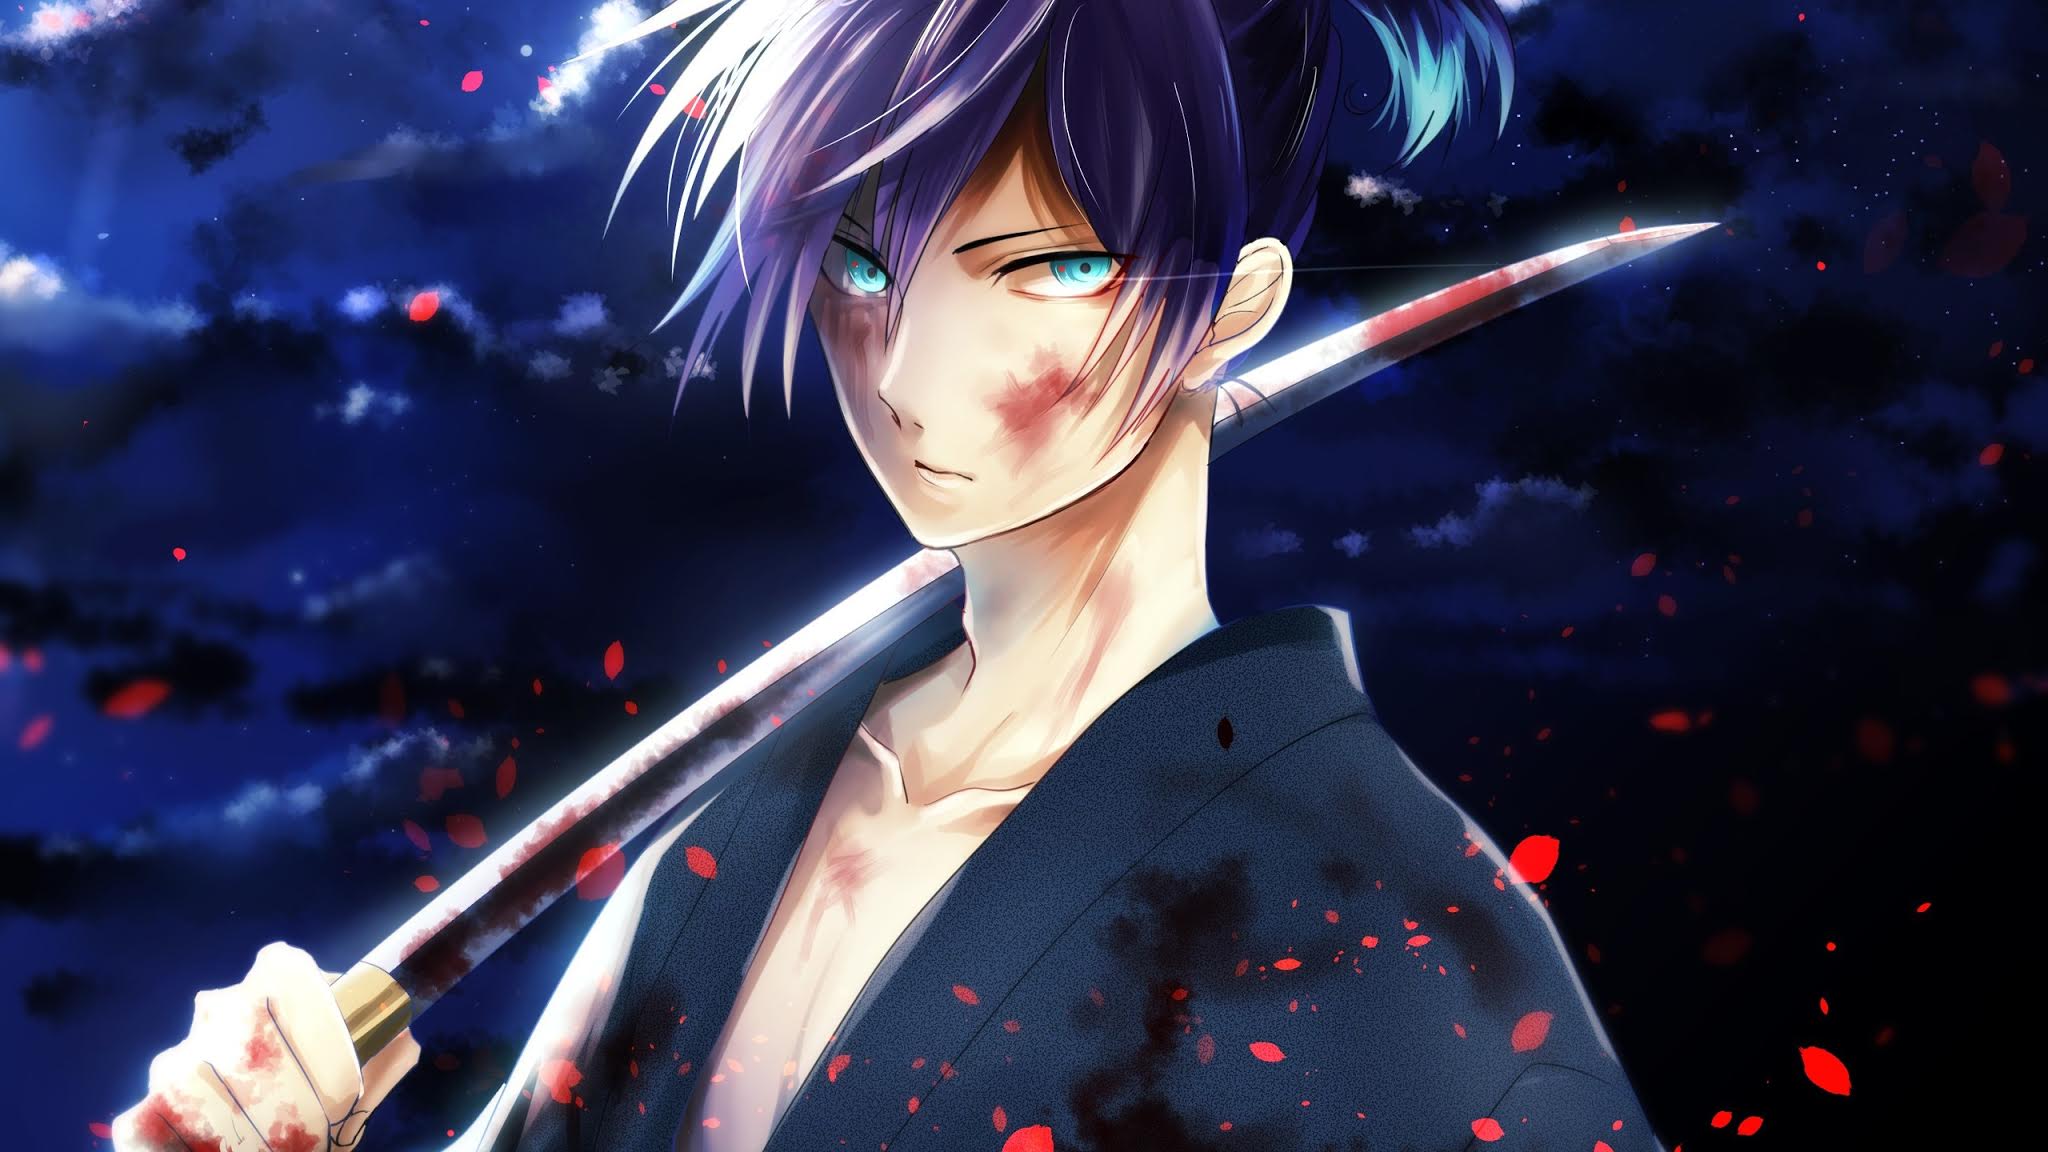 2. Yato from Noragami - wide 3